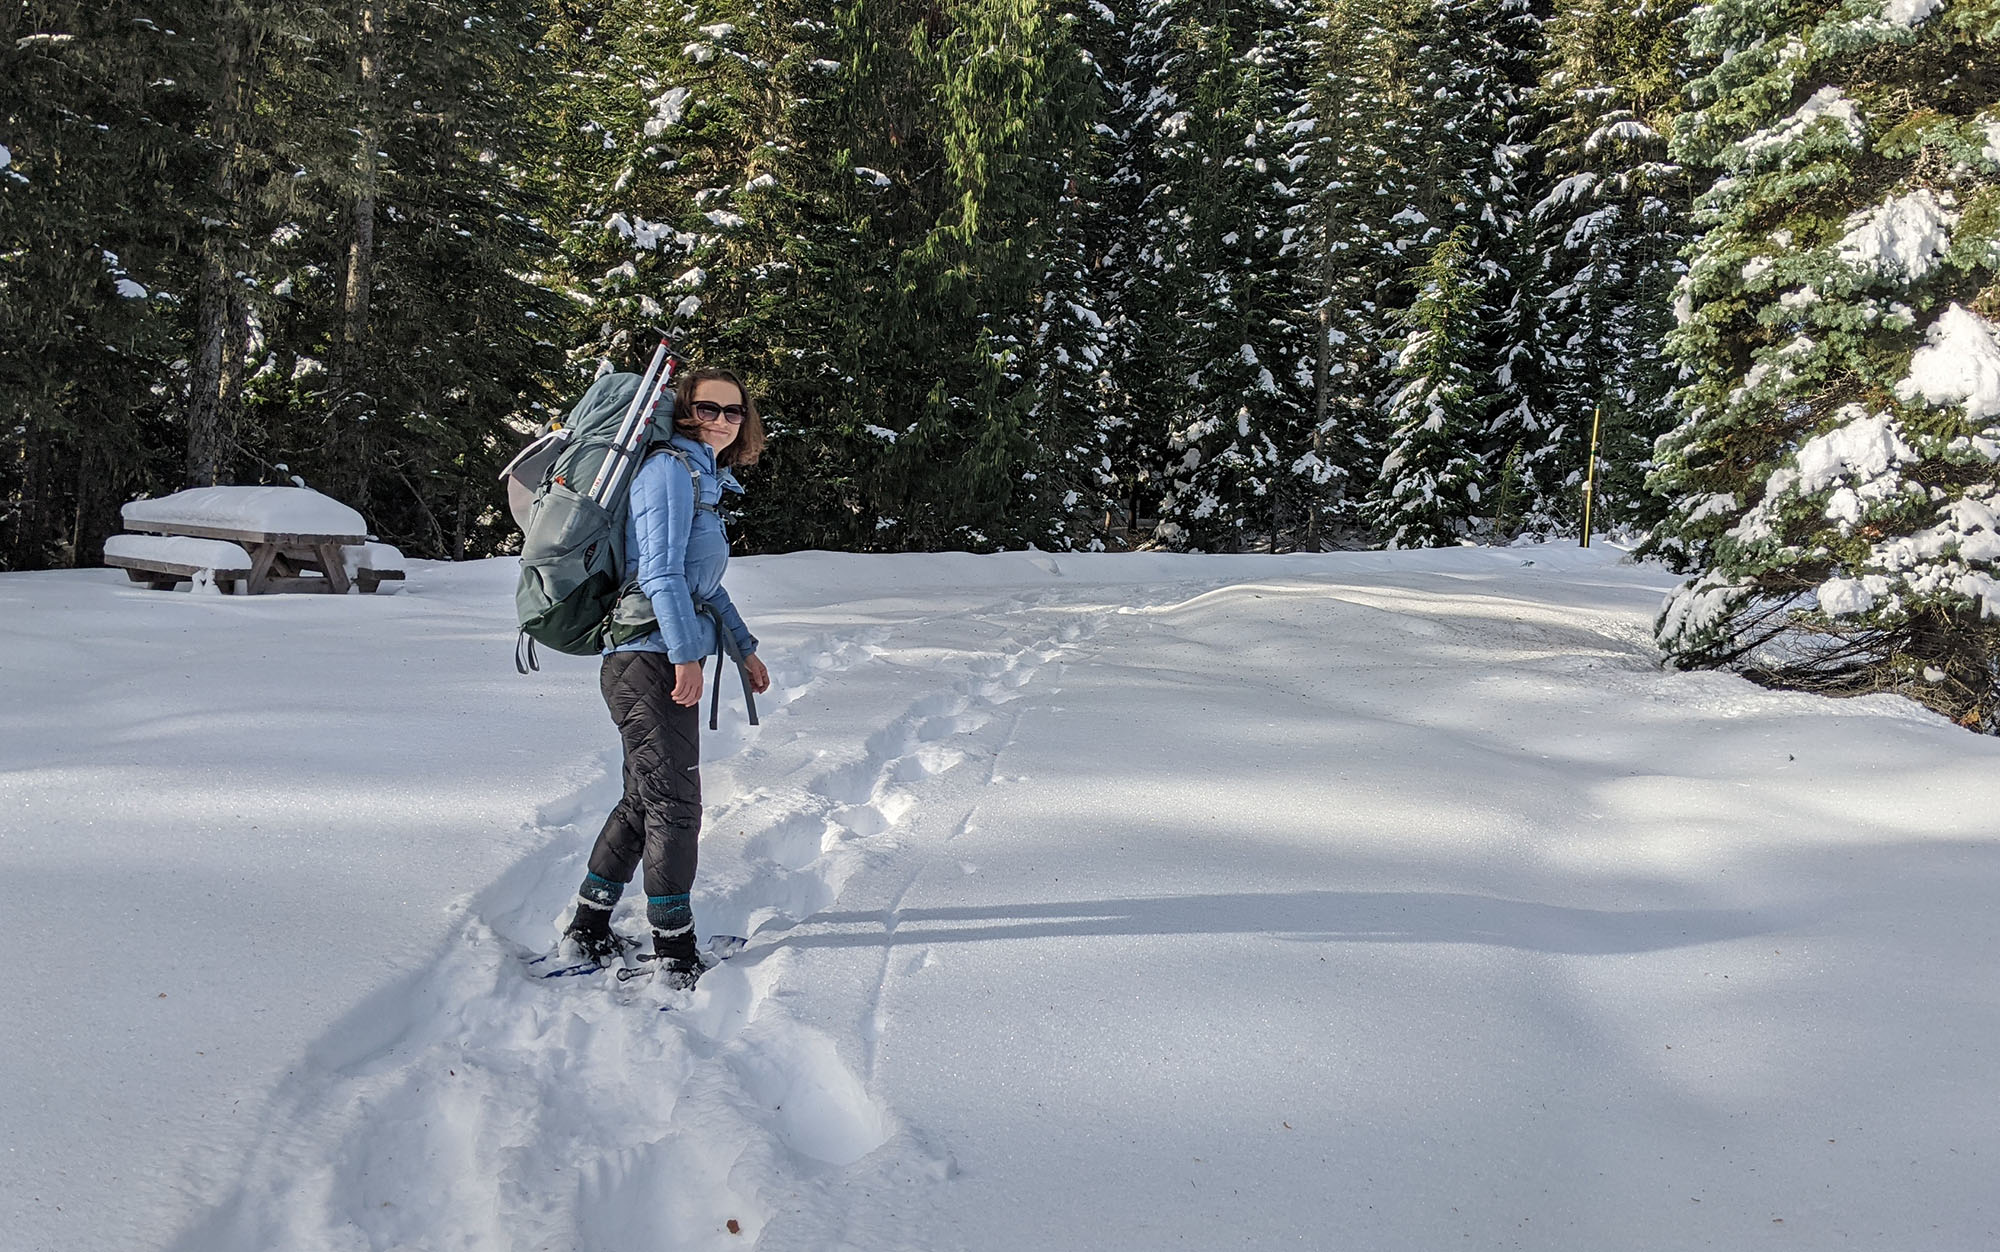 The Big Agnes Luna was the perfect layer to wear on an overnight snowshoe up to Mowich Lake in Mount Rainier National Park.